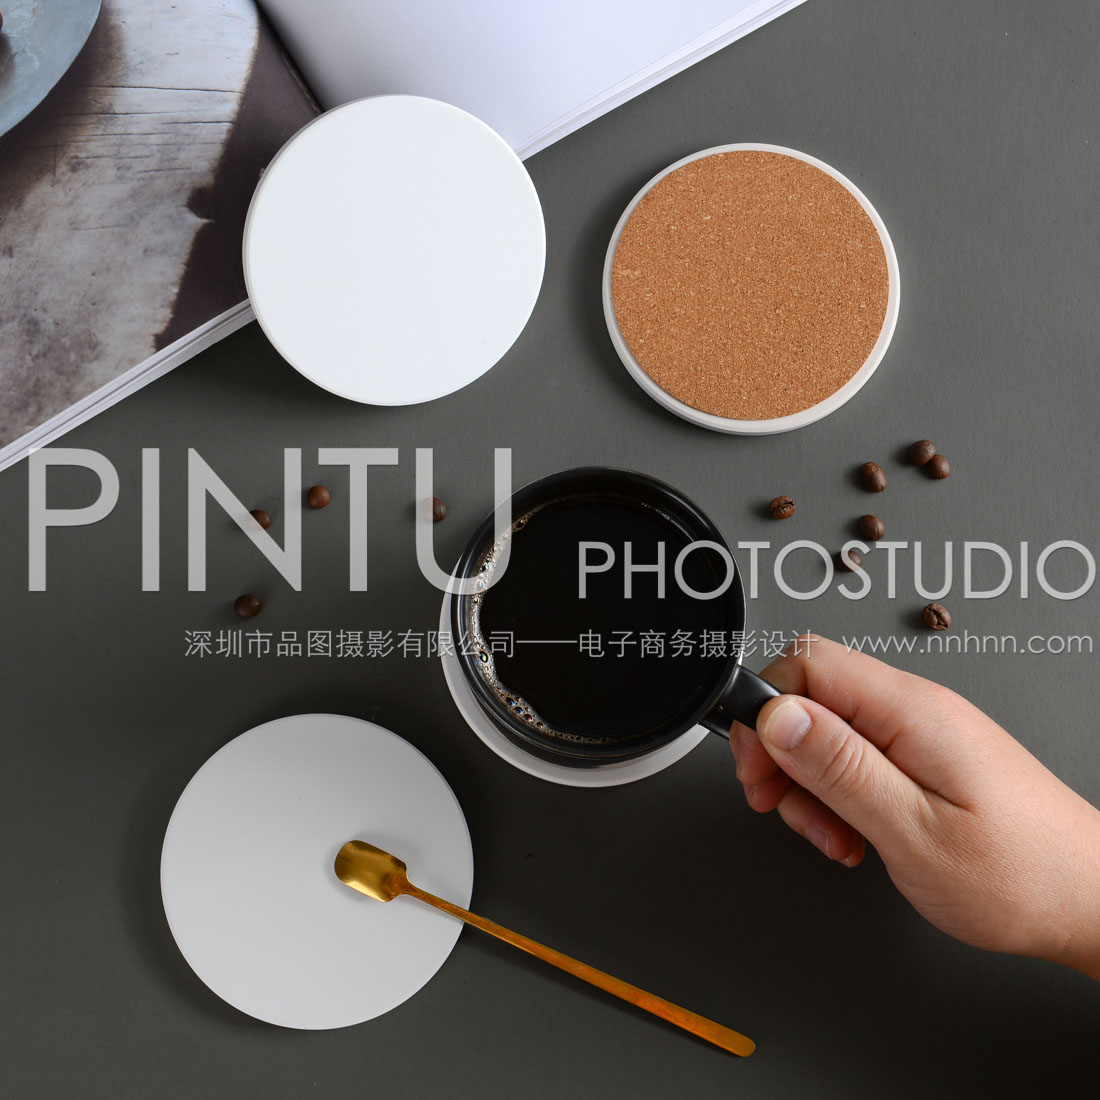 The best product photography in China Lifestyle cup cushions have hands